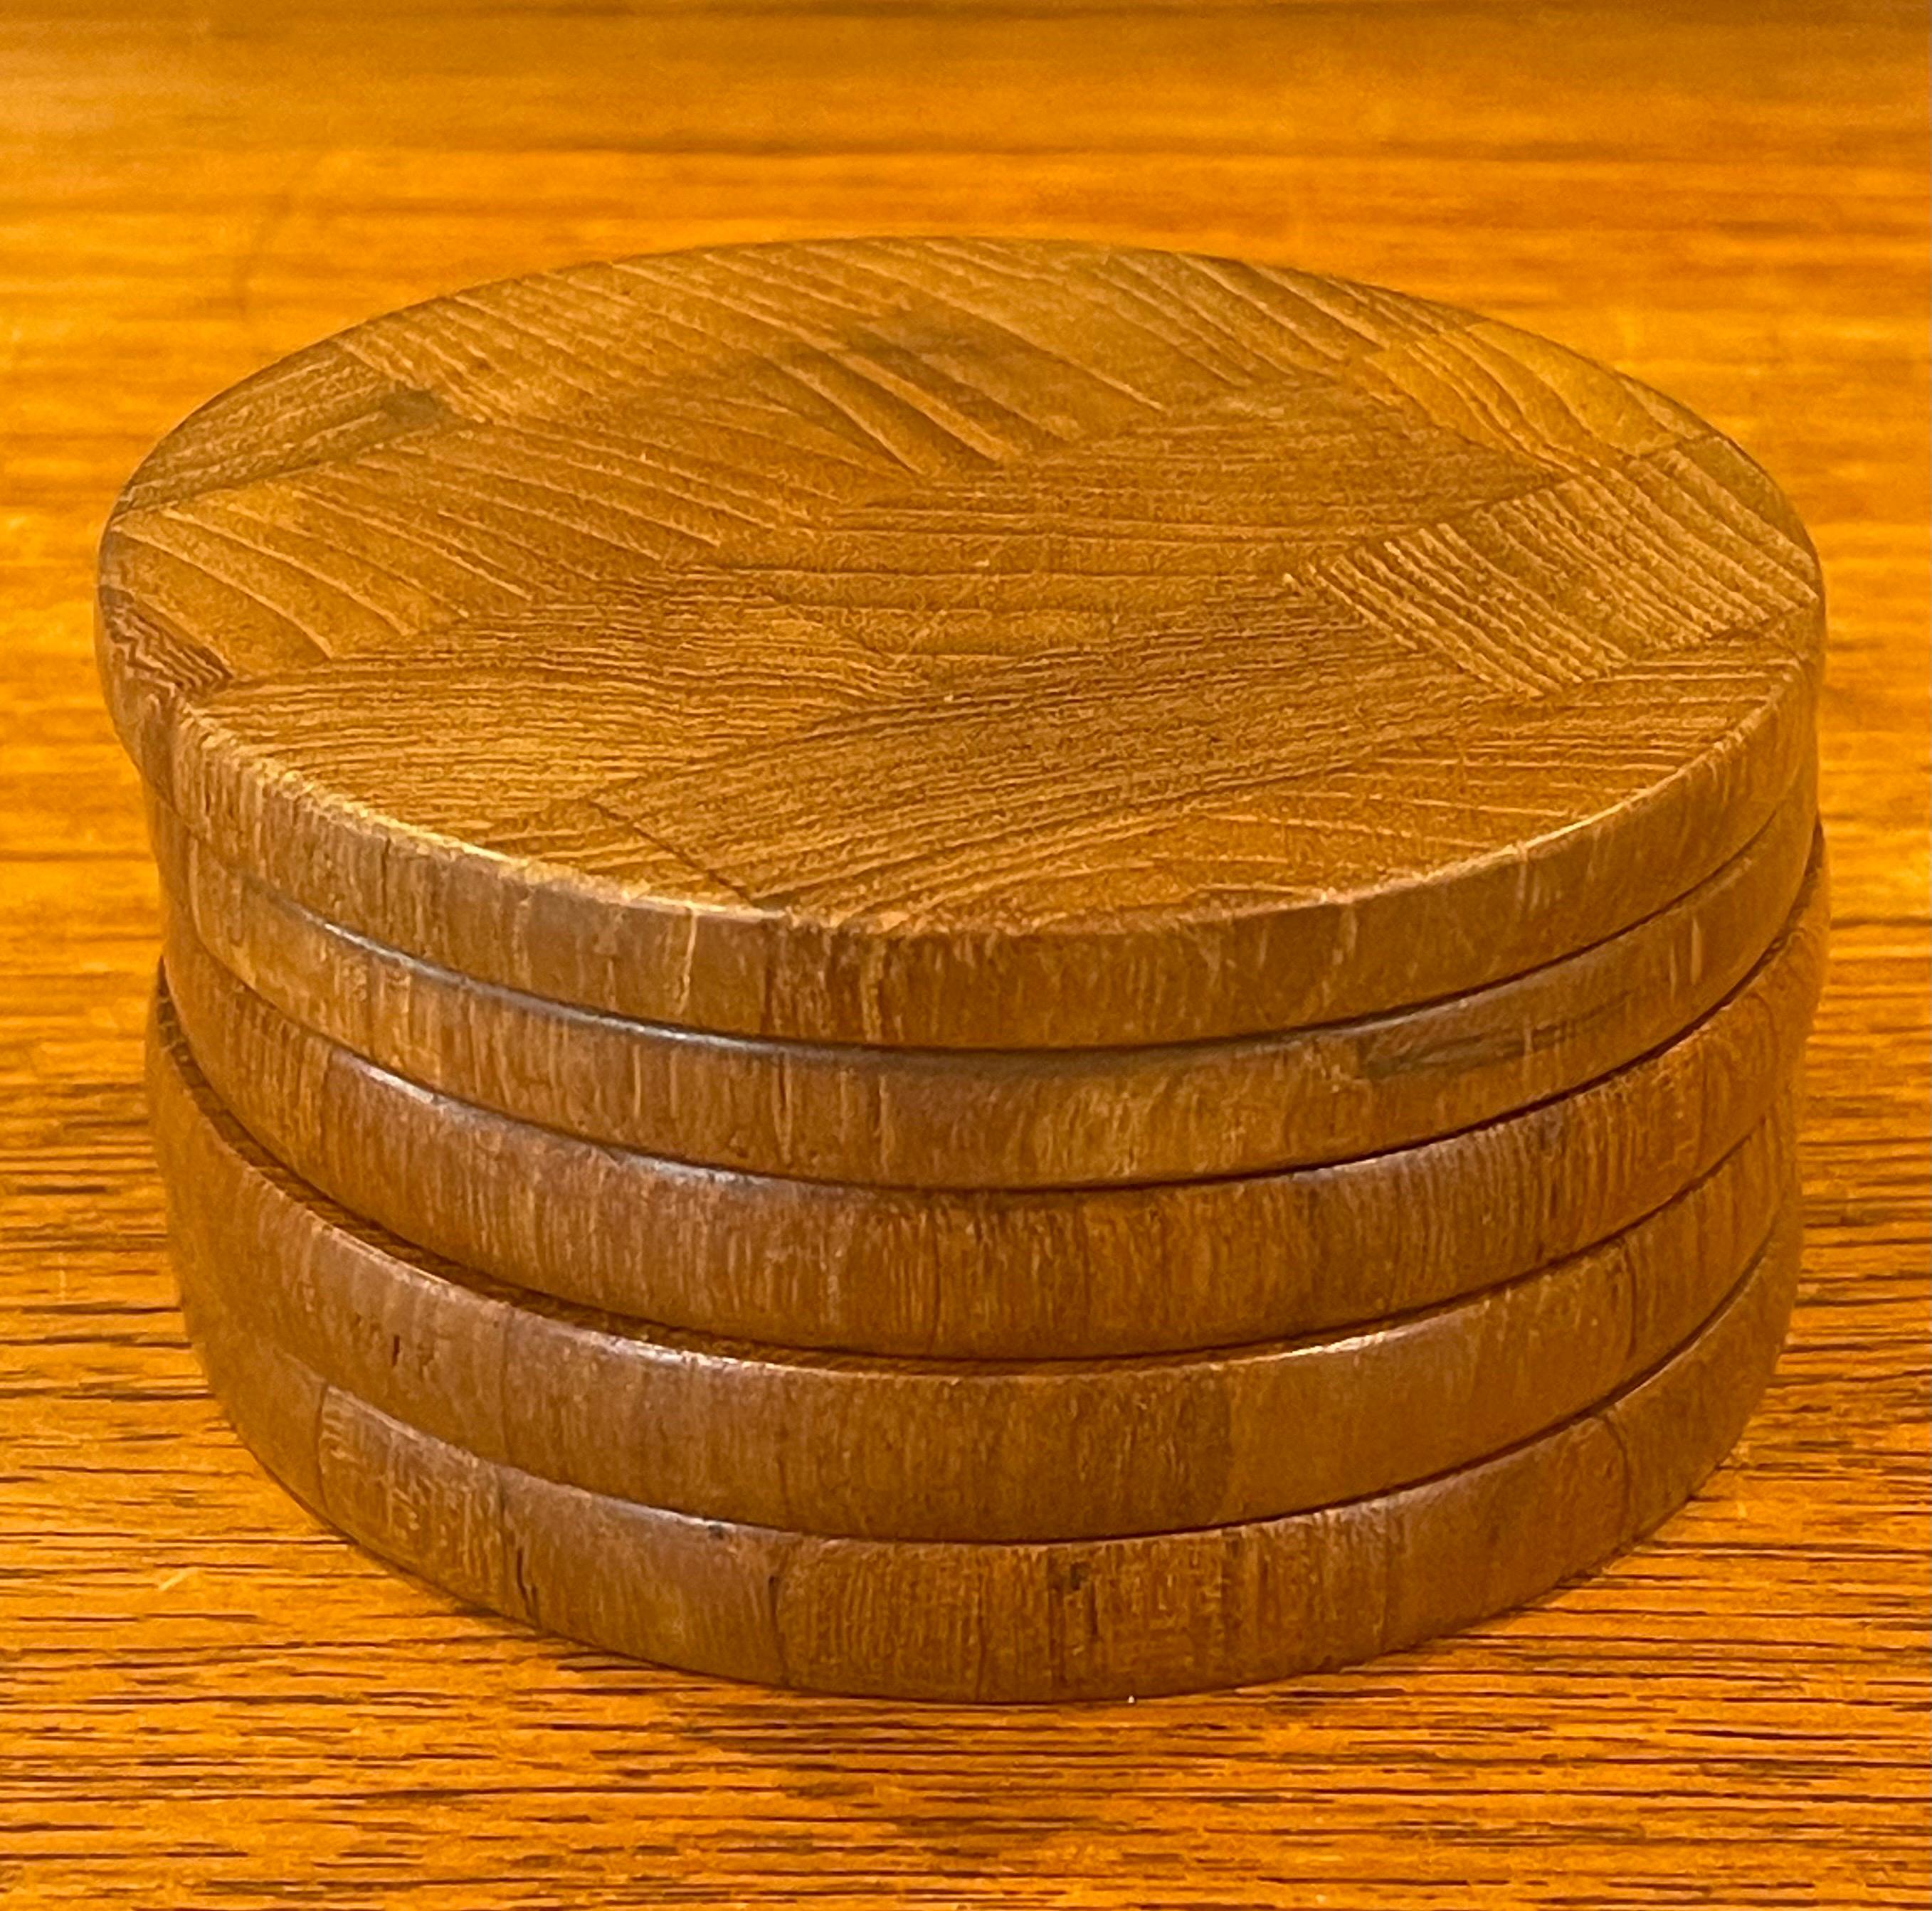 Nice set of five Danish modern staved teak coasters by Dansk, circa 1970s. The coasters are in very good vintage condition and measure 3.75